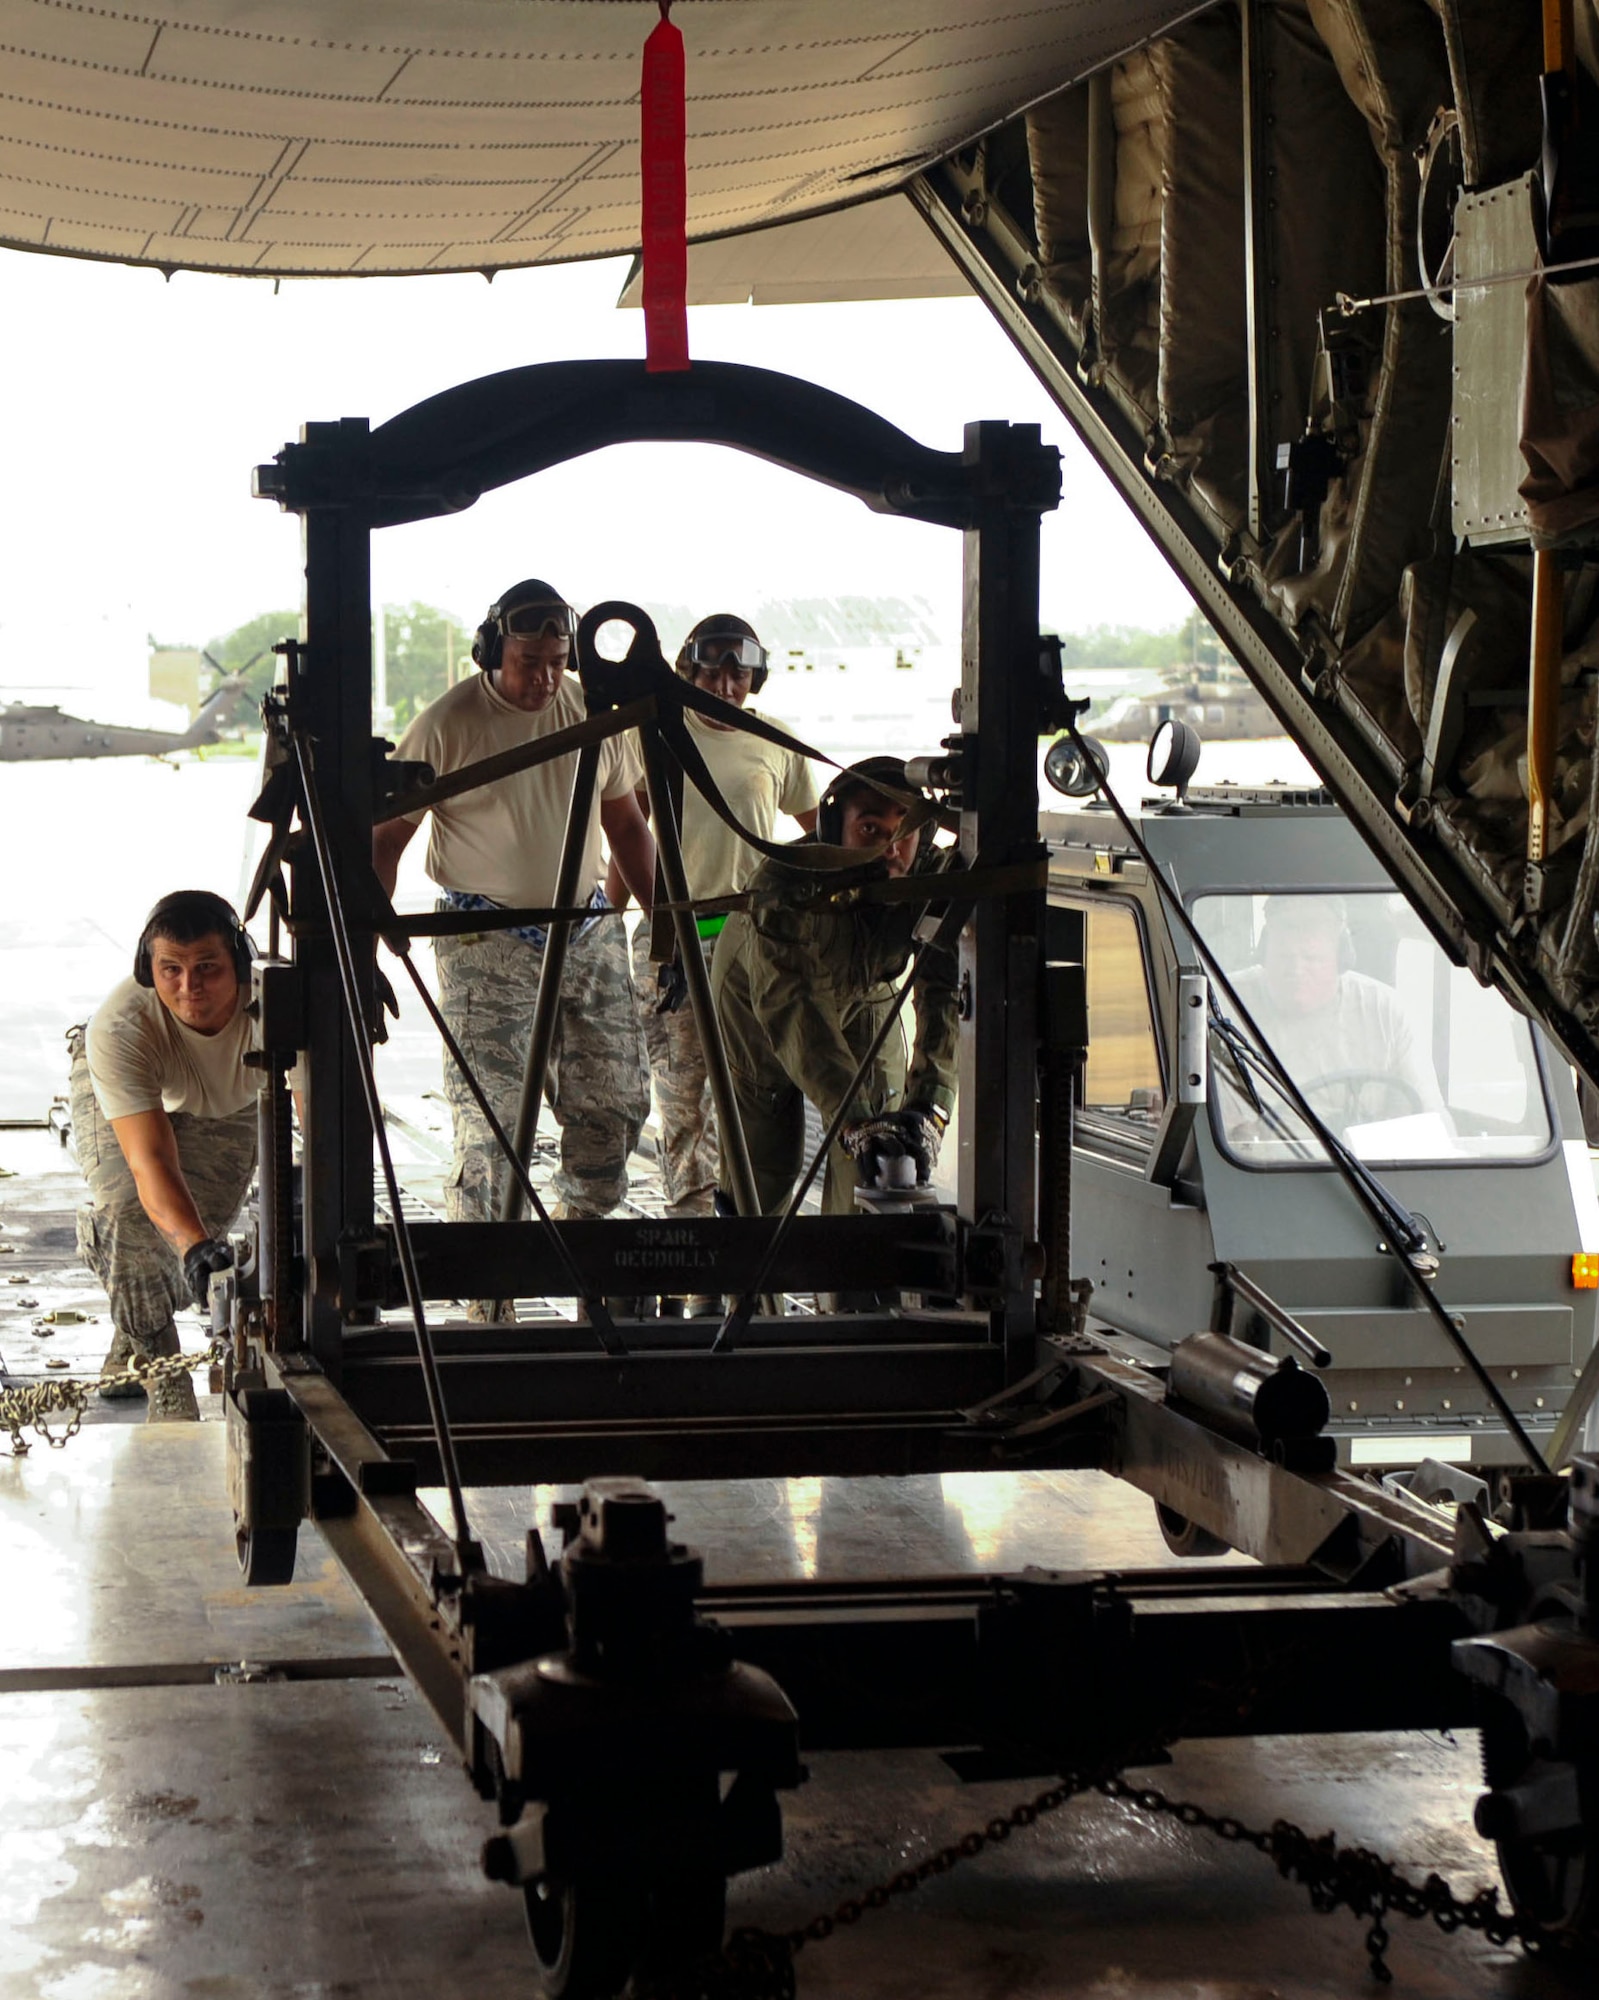 Loadmasters from the 41st Airlift Squadron from Little Rock Air Force Base, Ark., assist Airmen from the 305th Aerial Port Squadron at Joint Base McGuire-Dix-Lakehurst, New Jersey, loading a C-130 engine stand trailer unit Aug. 26, 2016, at a landing zone in Alexandria, Louisiana. The 1,430-lb. trailer is used to safely transport an aircraft’s engine from the runway to a maintenance bay to allow more precise repairs. (U.S. Air Force photo by Staff Sgt. Regina Edwards) 